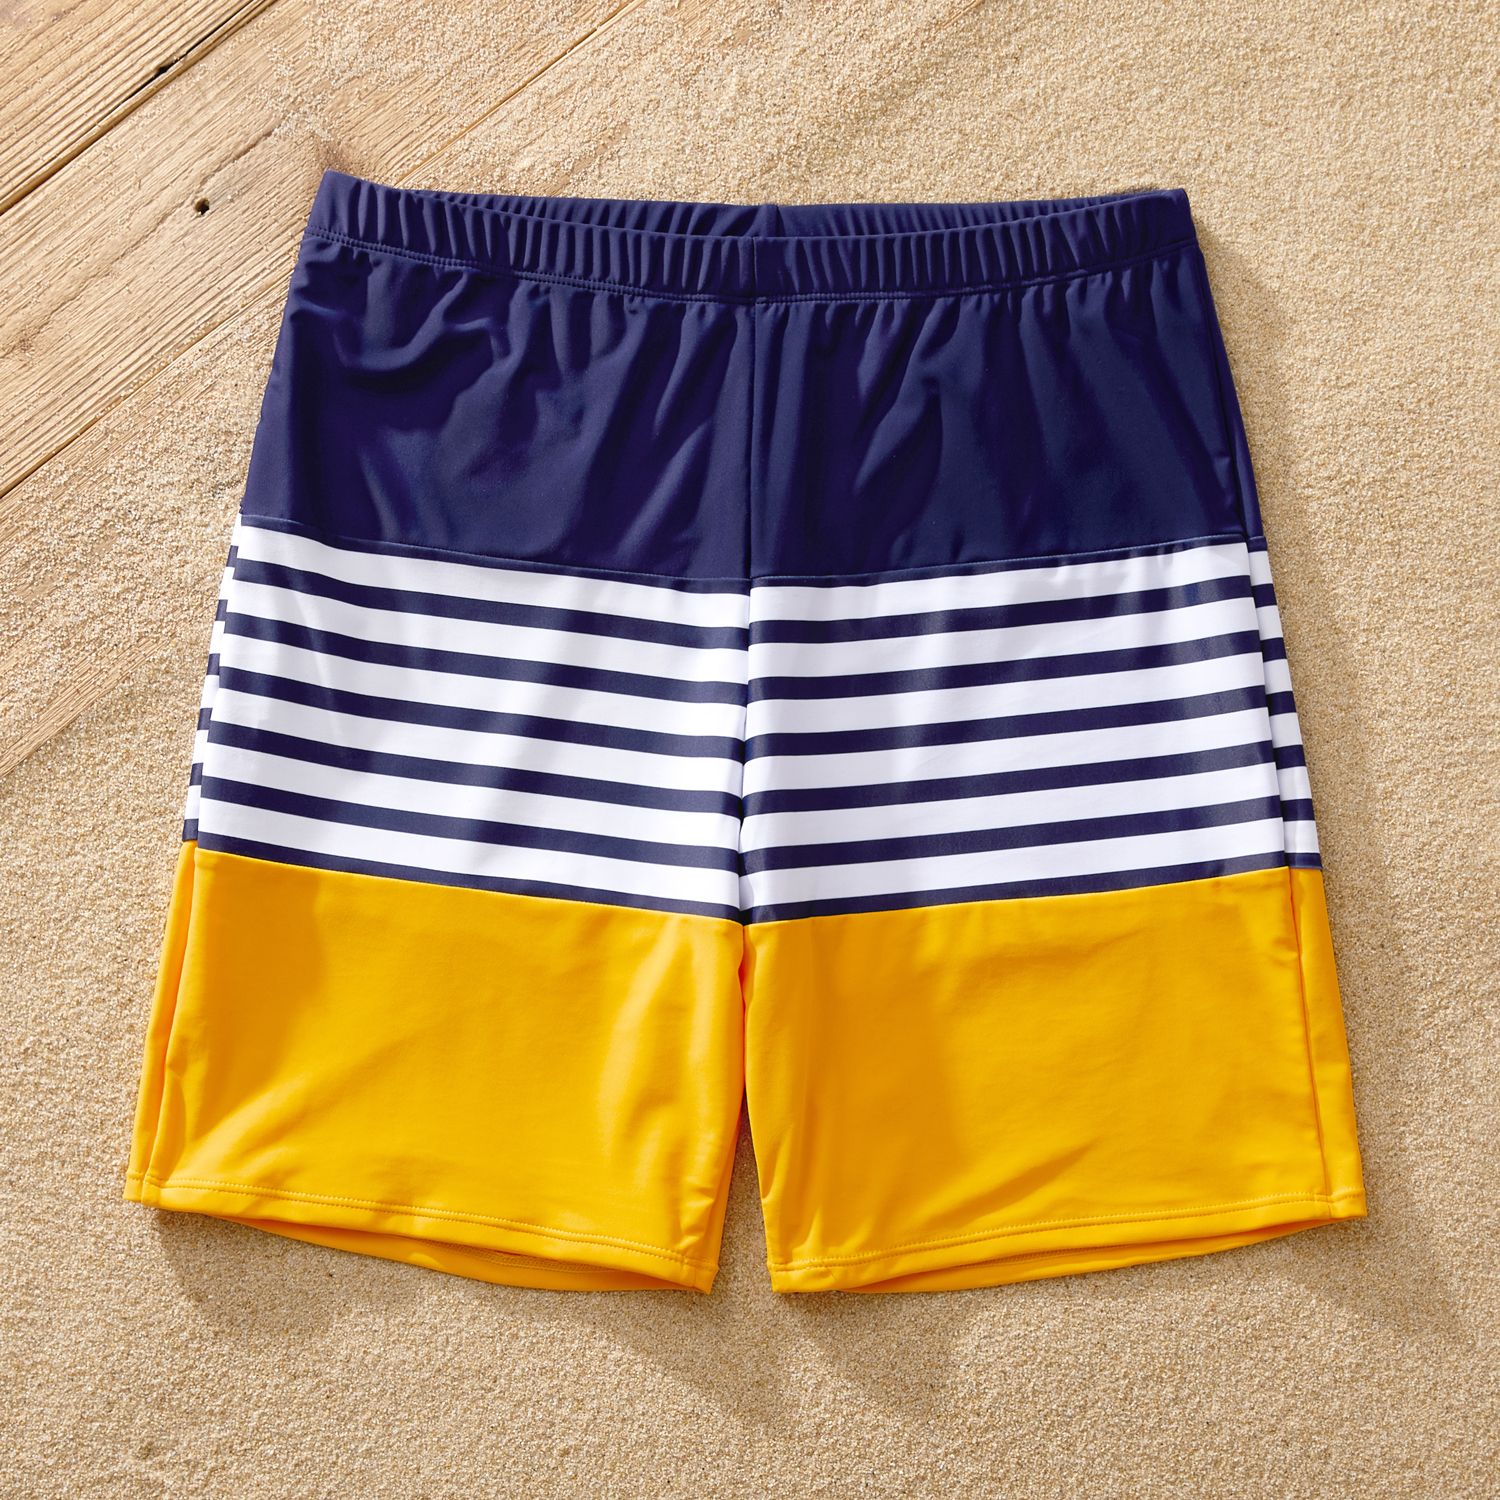 Family Matching Stripe & Colorblock Spliced One Piece Swimsuit Or Swim Trunks Shorts